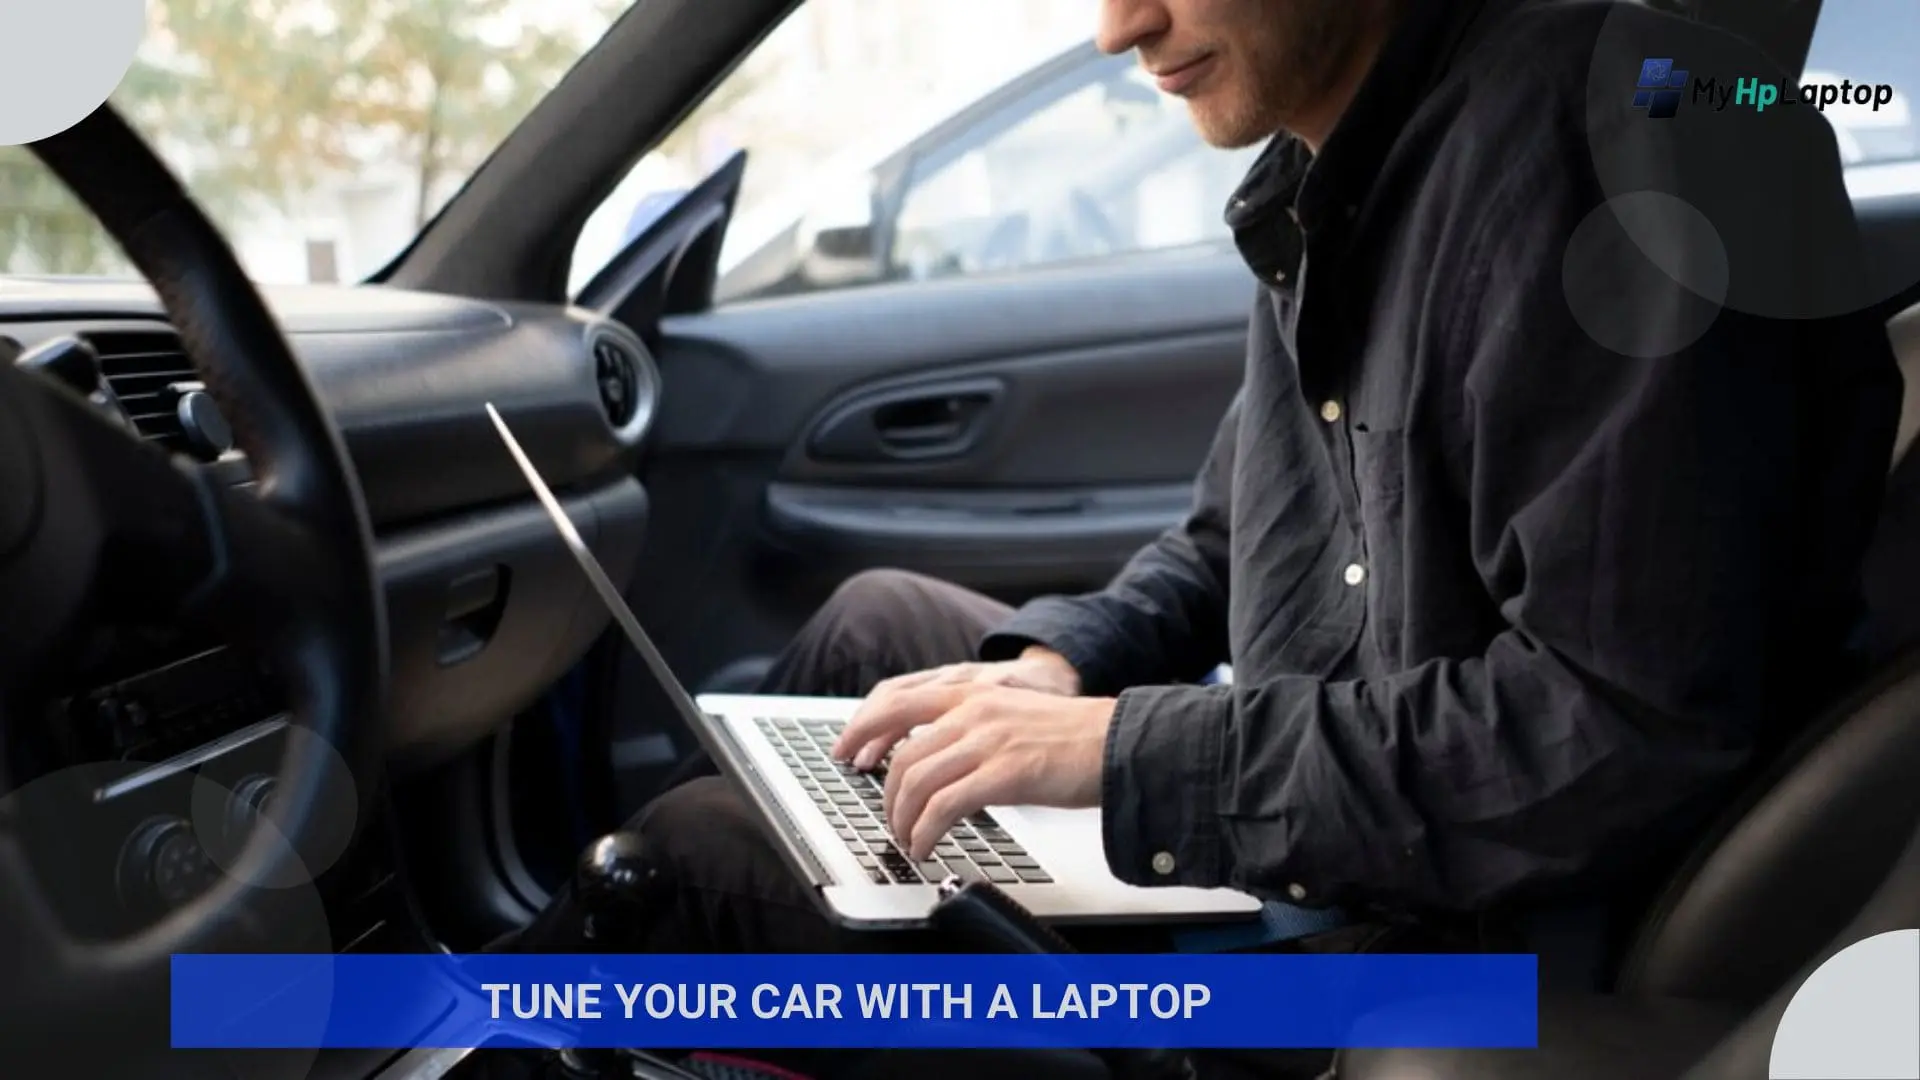 Tune Your Car with a Laptop